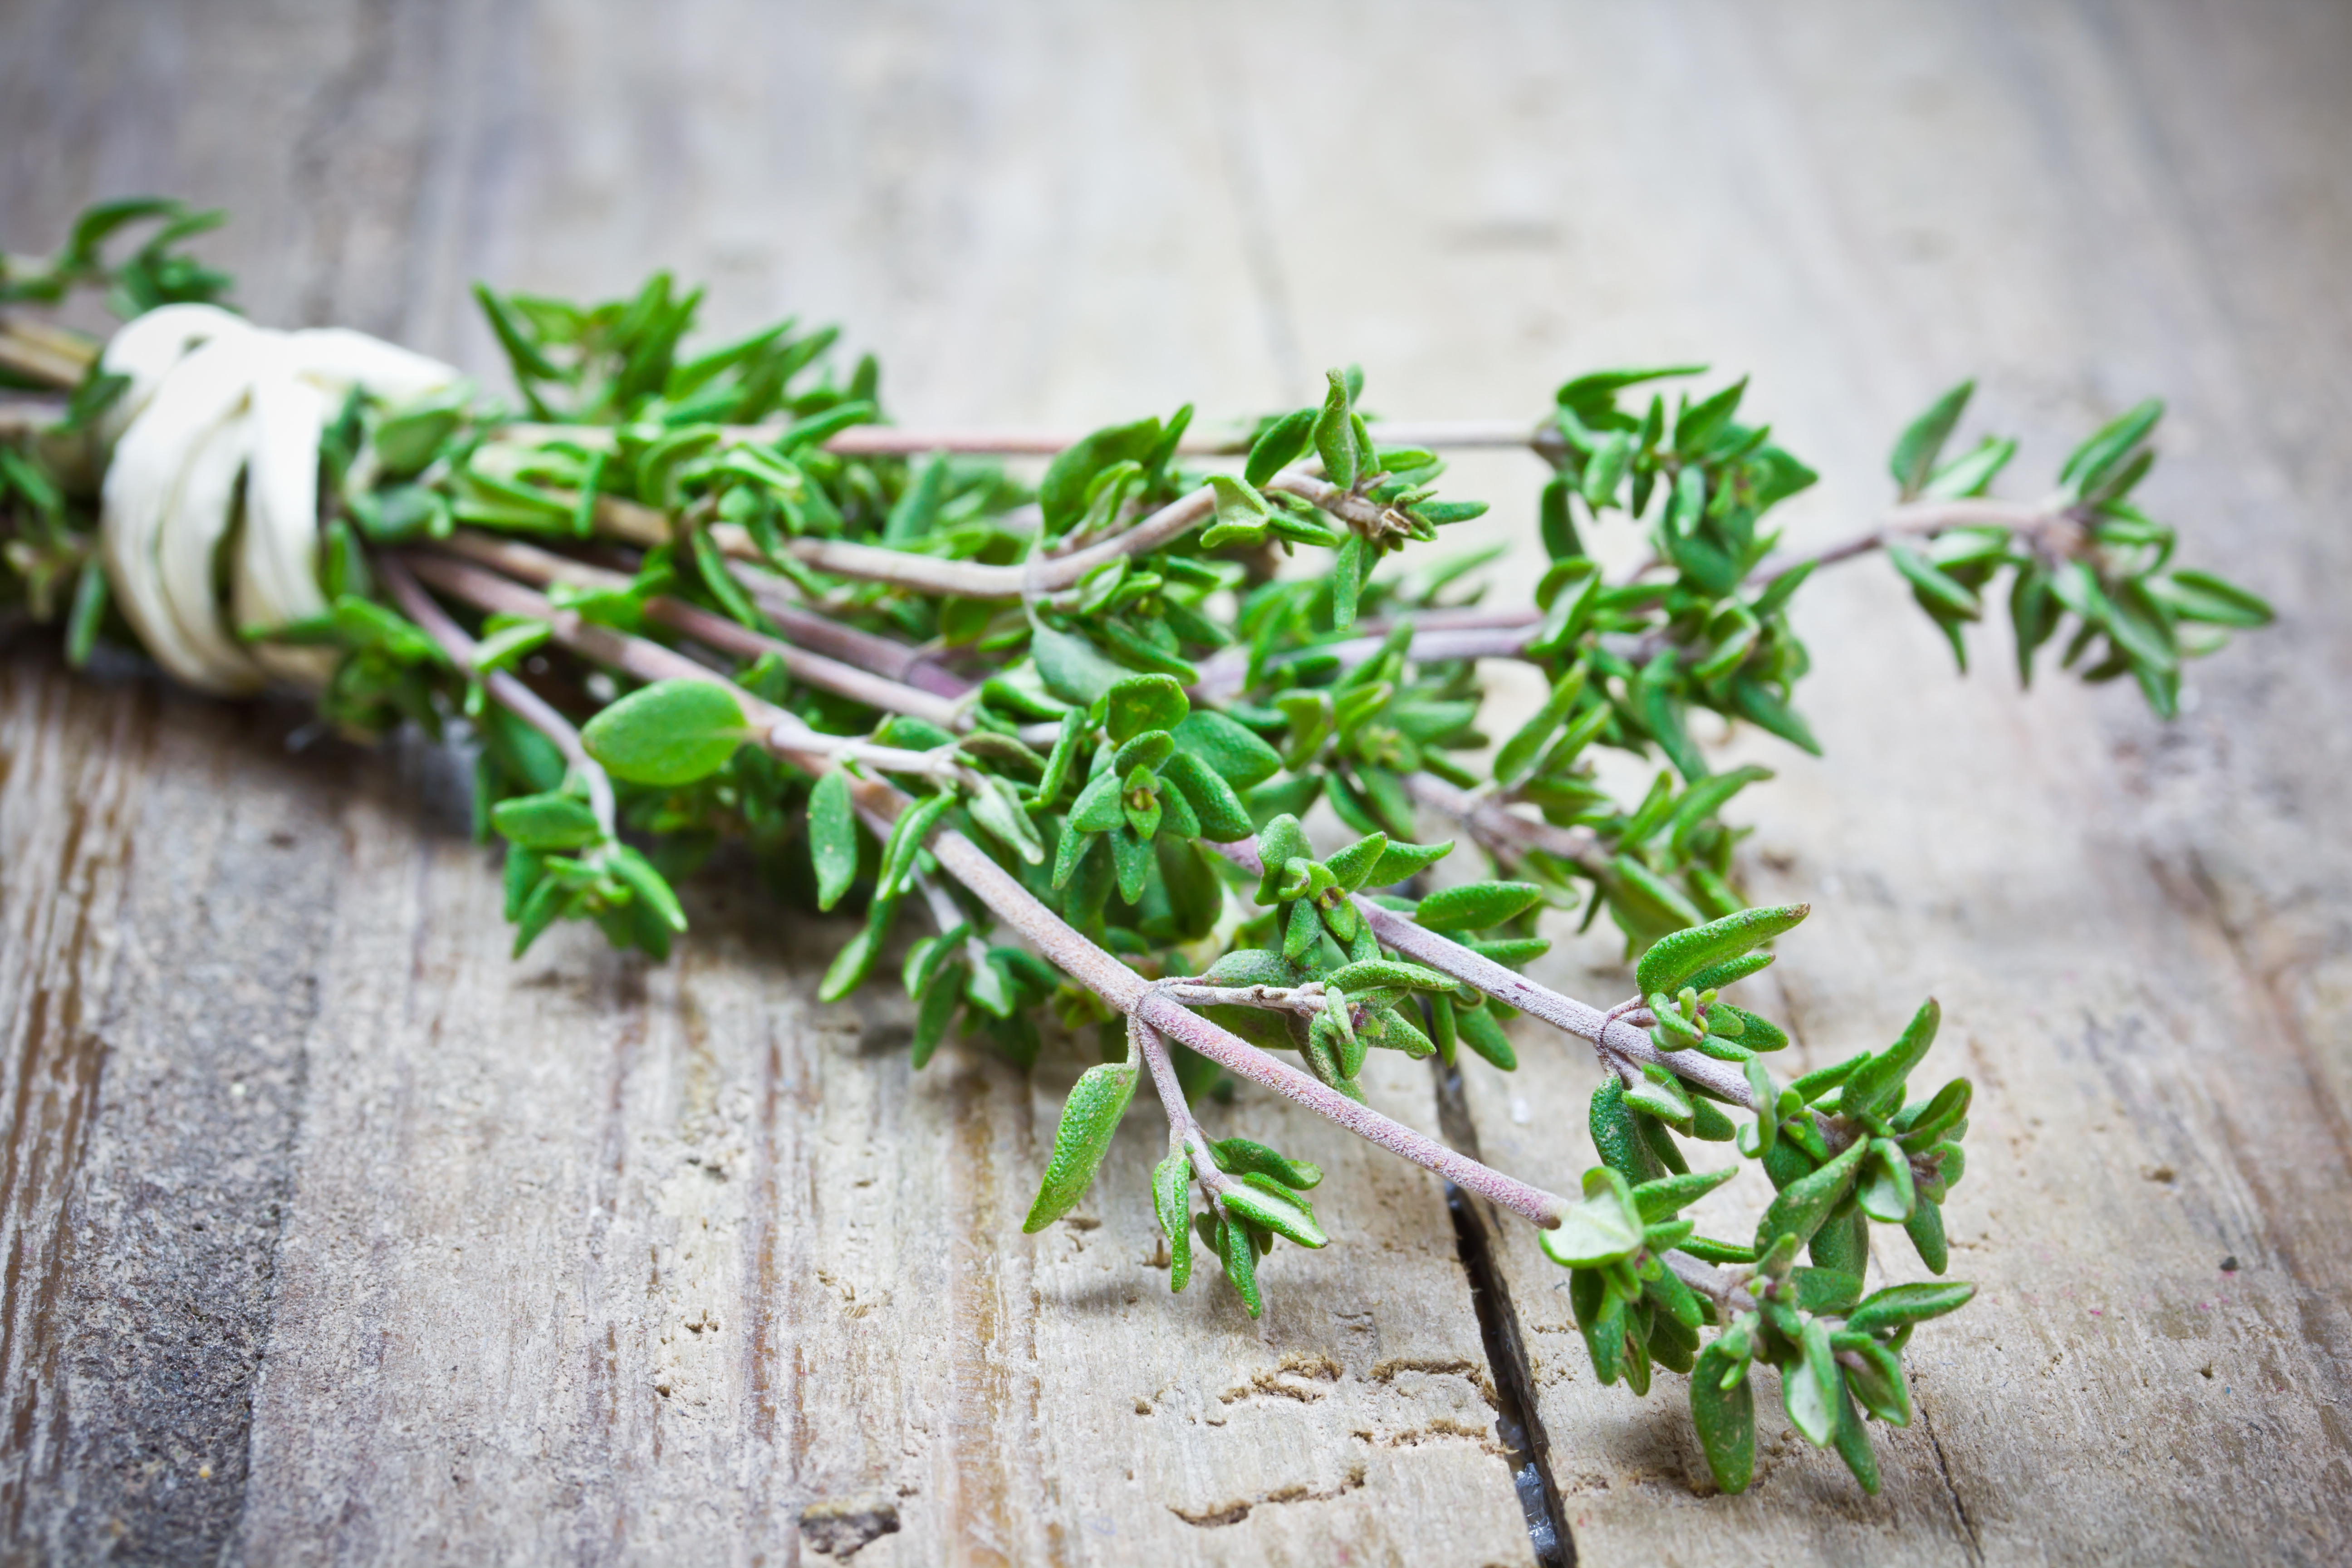 thyme uses in food